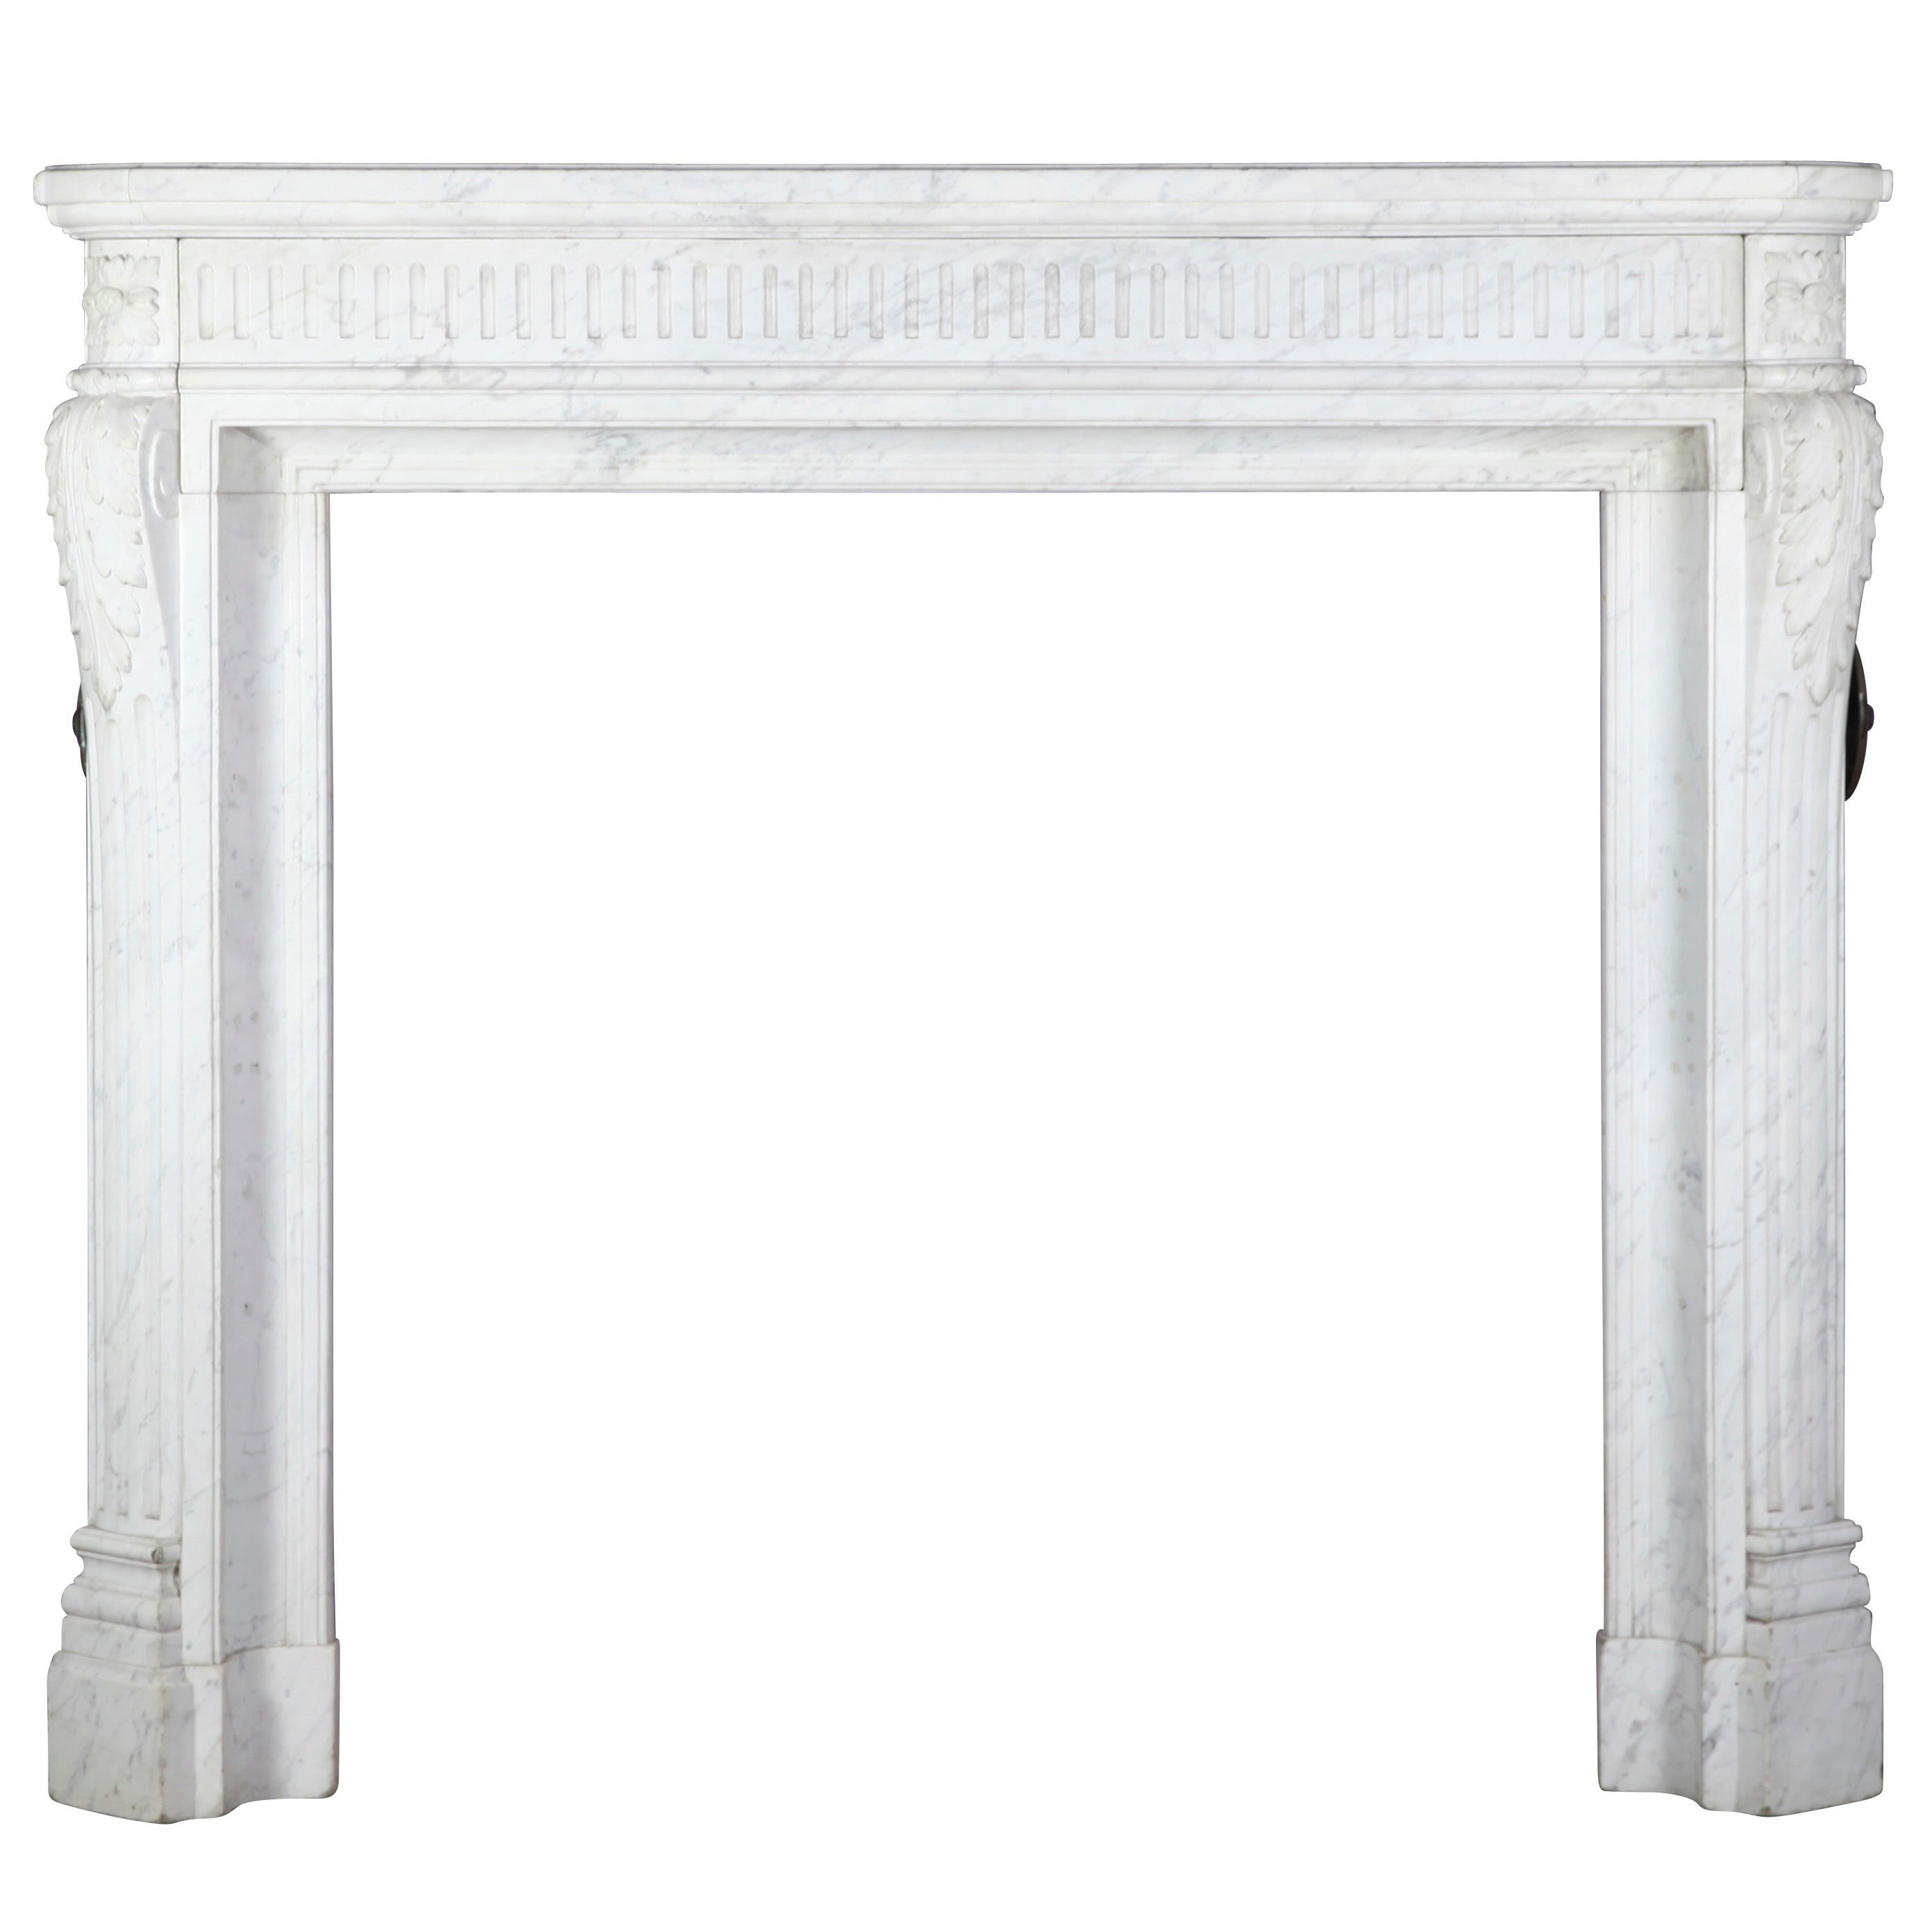 Antique French Classic Fireplace Mantel in Carrara Marble